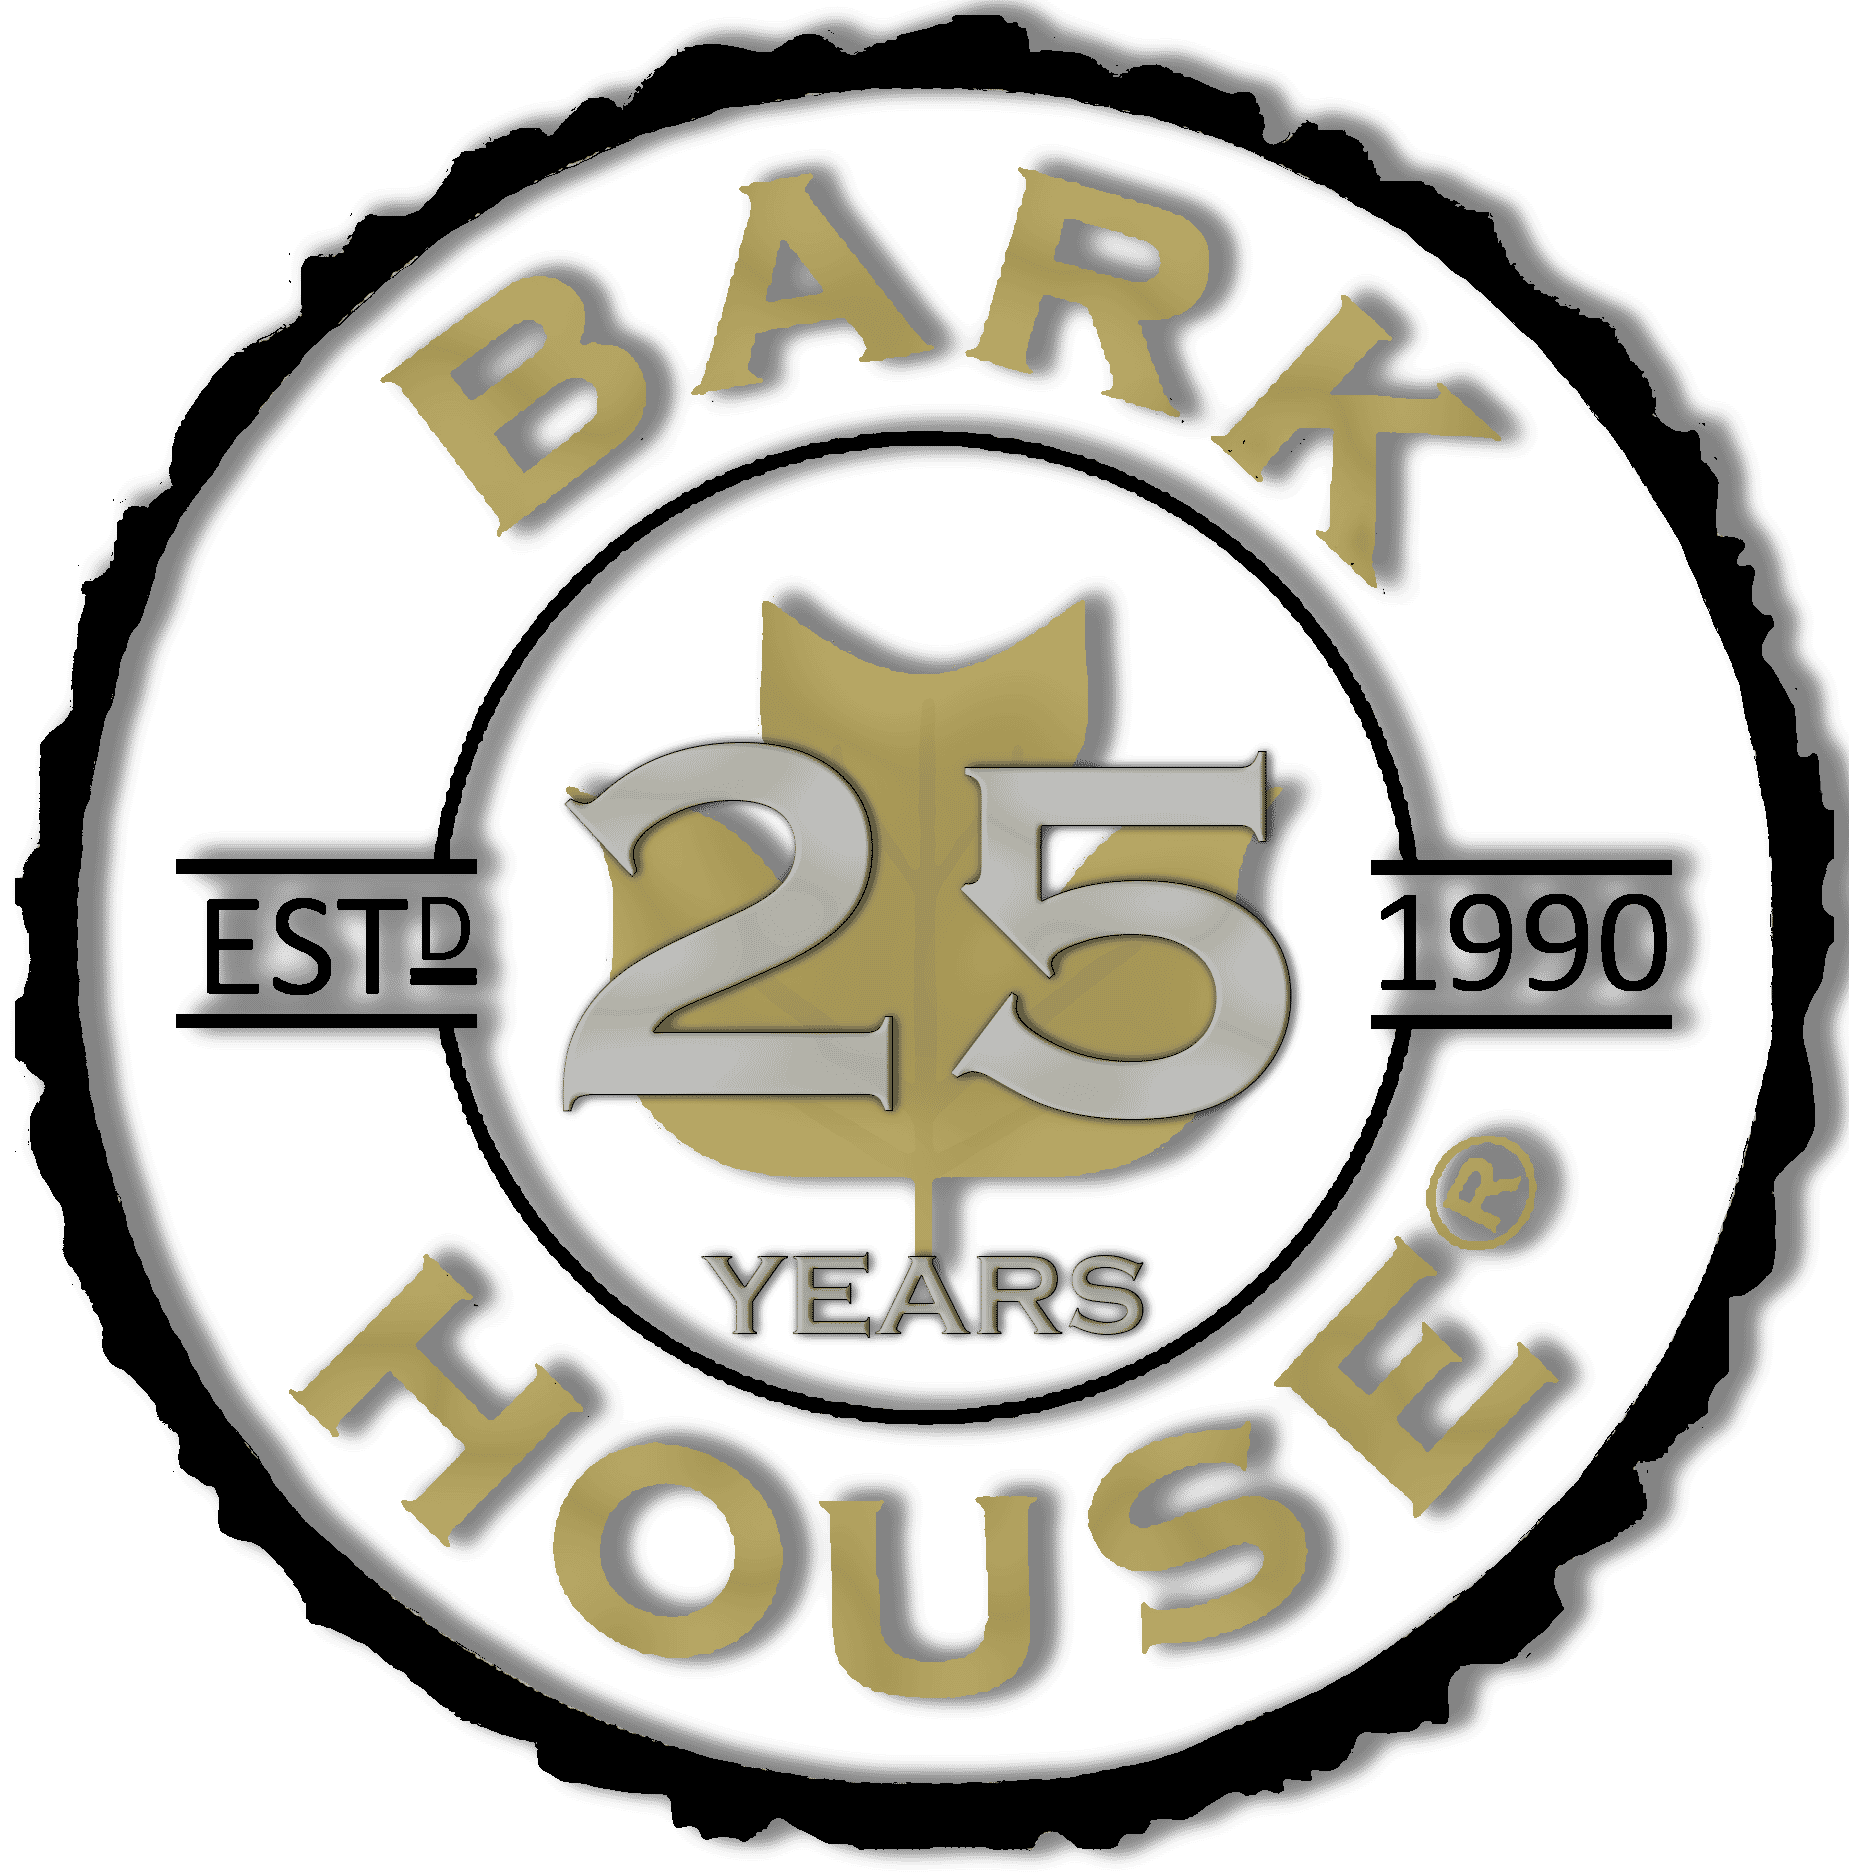 The Bark House at Highland Craftsmen Inc celebrates 25 years in business